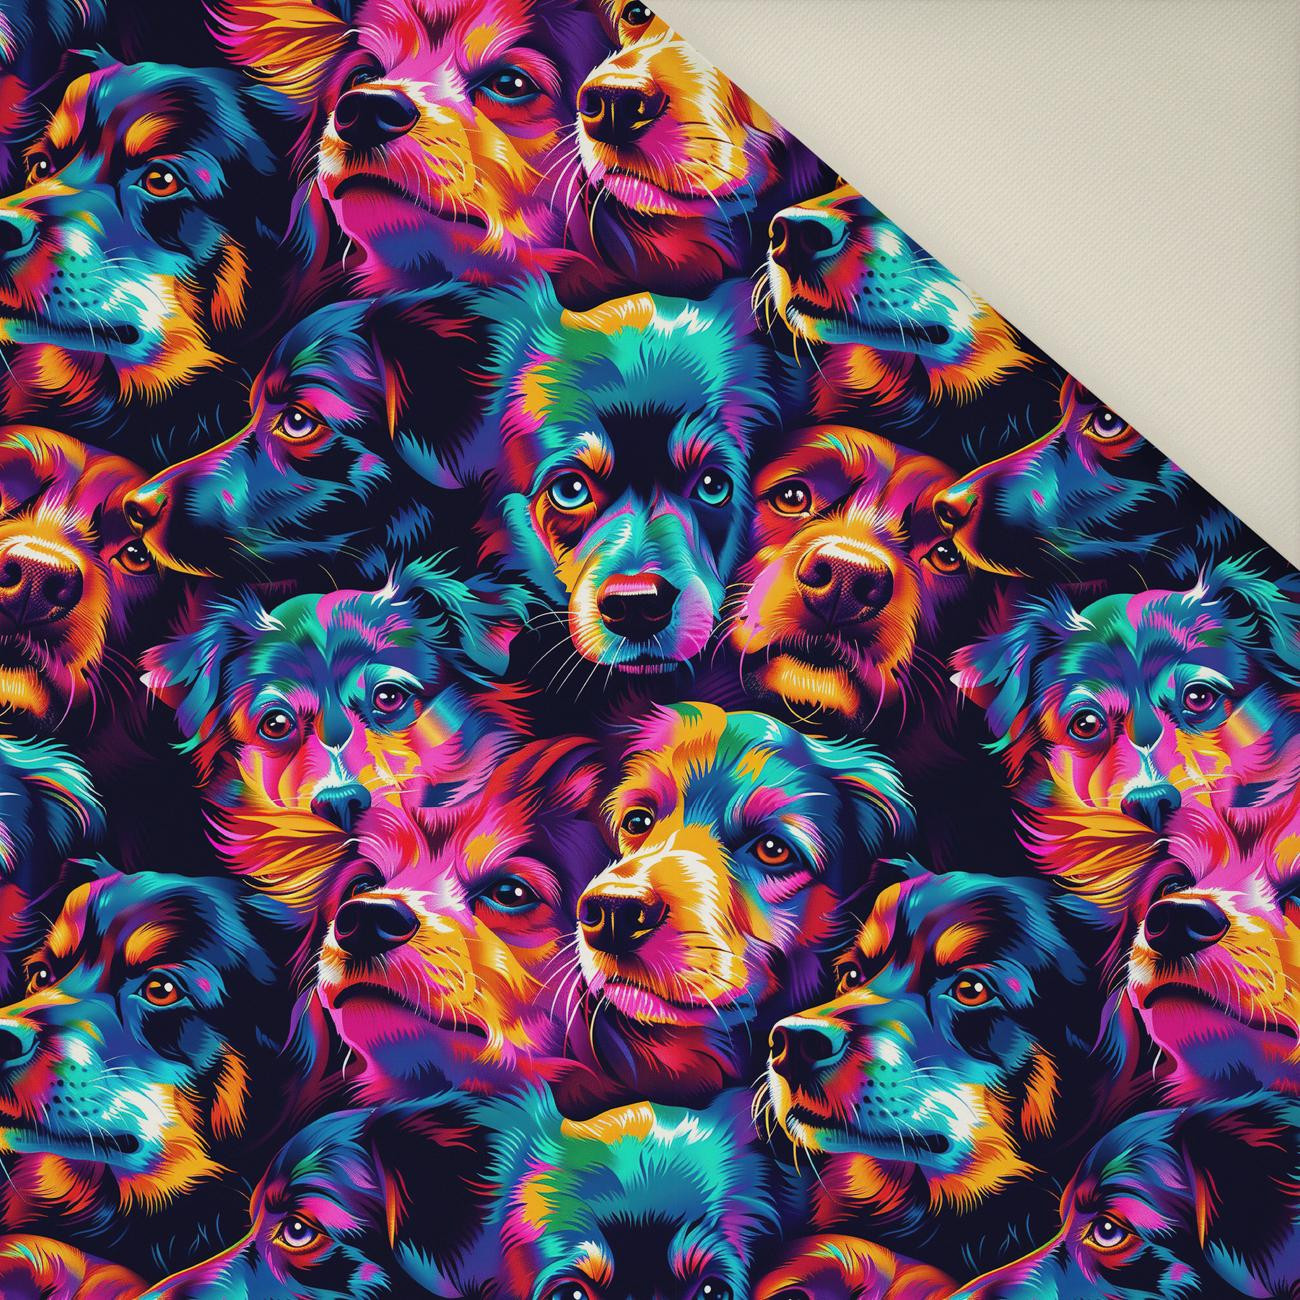 COLORFUL DOGS- Polster- Velours